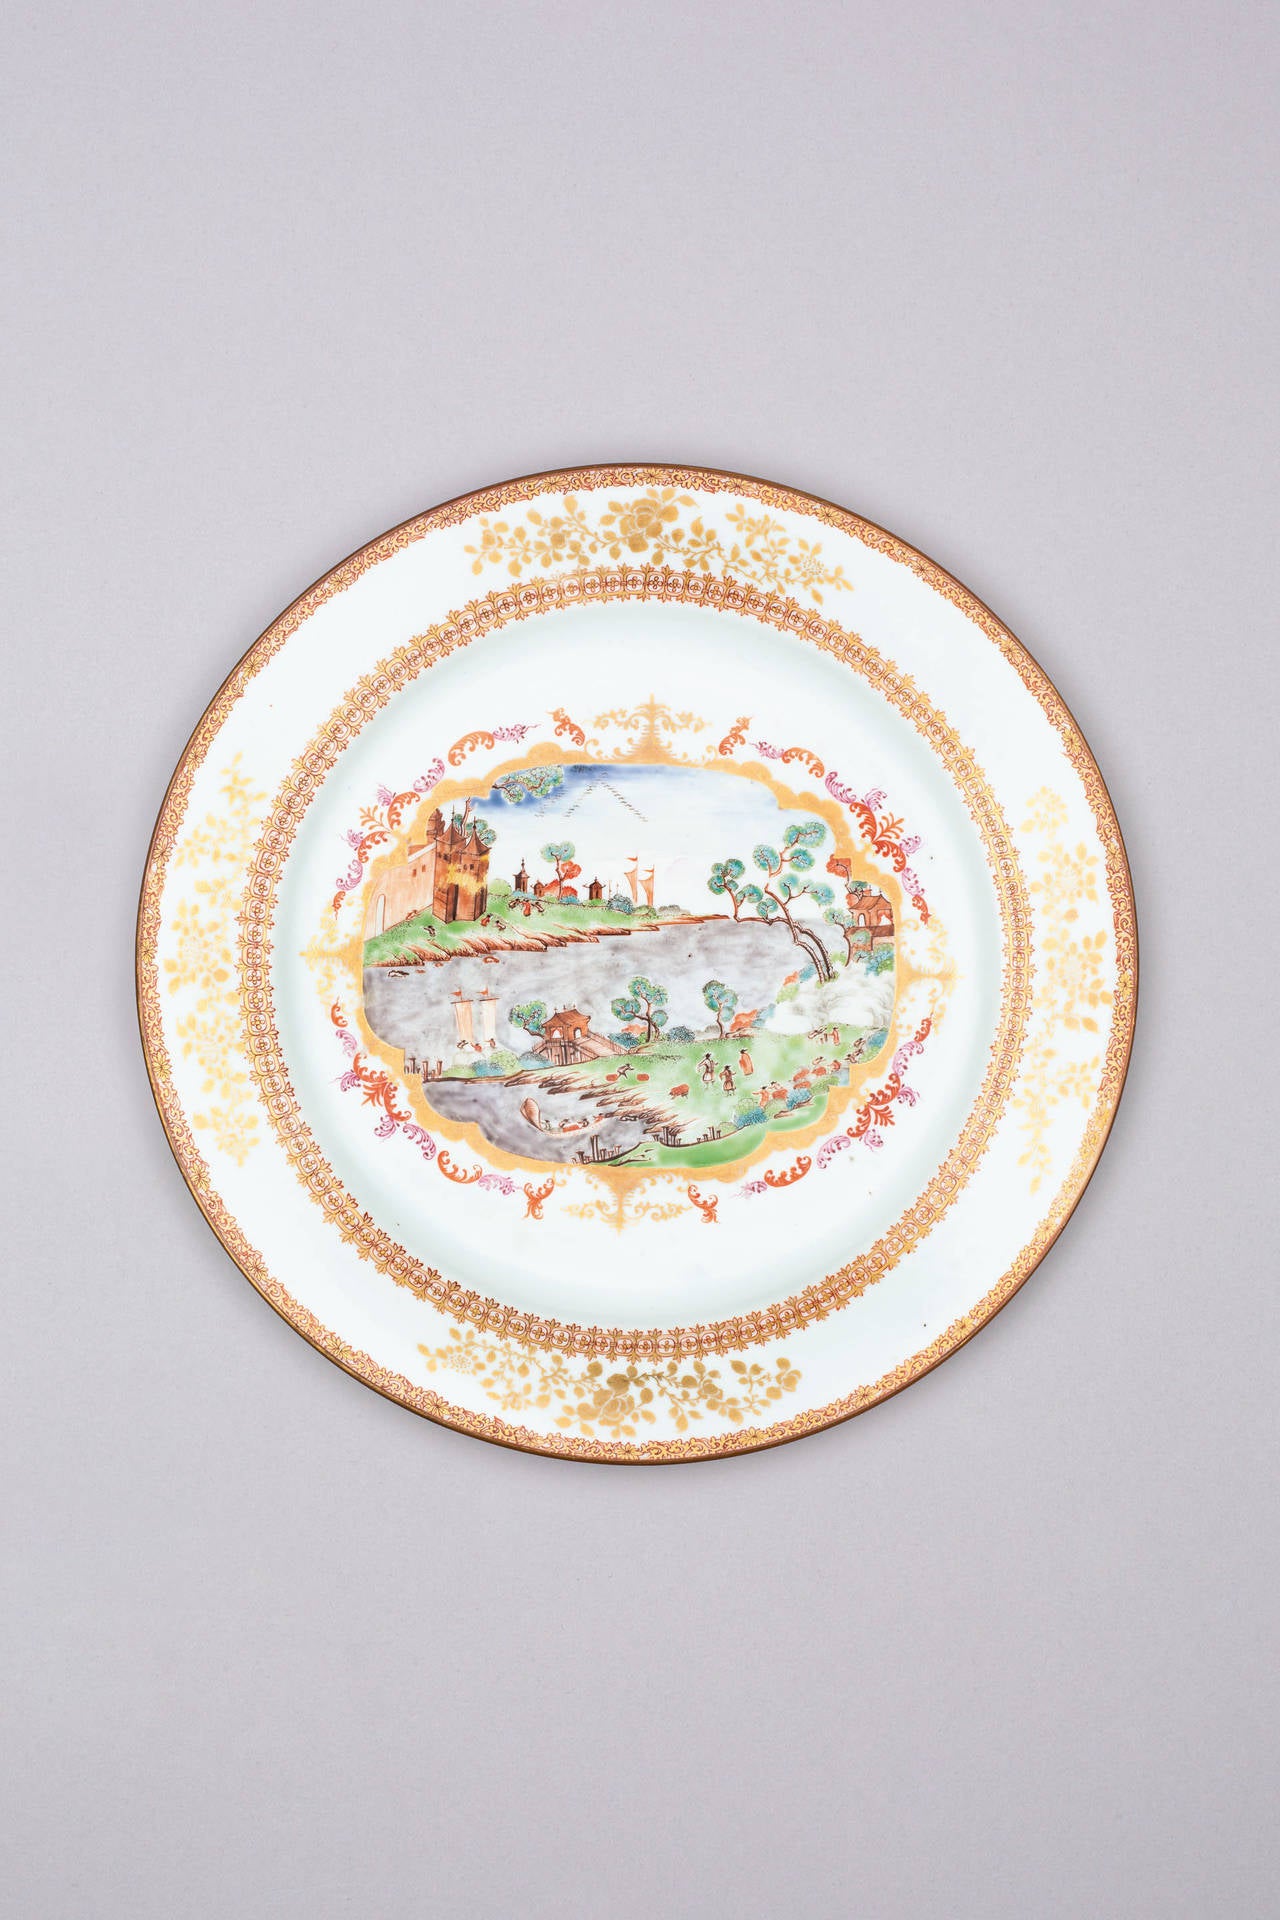 Famille rose large circular tureen, cover and stand, after the Meissen original, each piece painted with a scene depicting European figures on grassy slopes along the banks of an estuary, some carrying bales of cargo, others in ships, with buildings